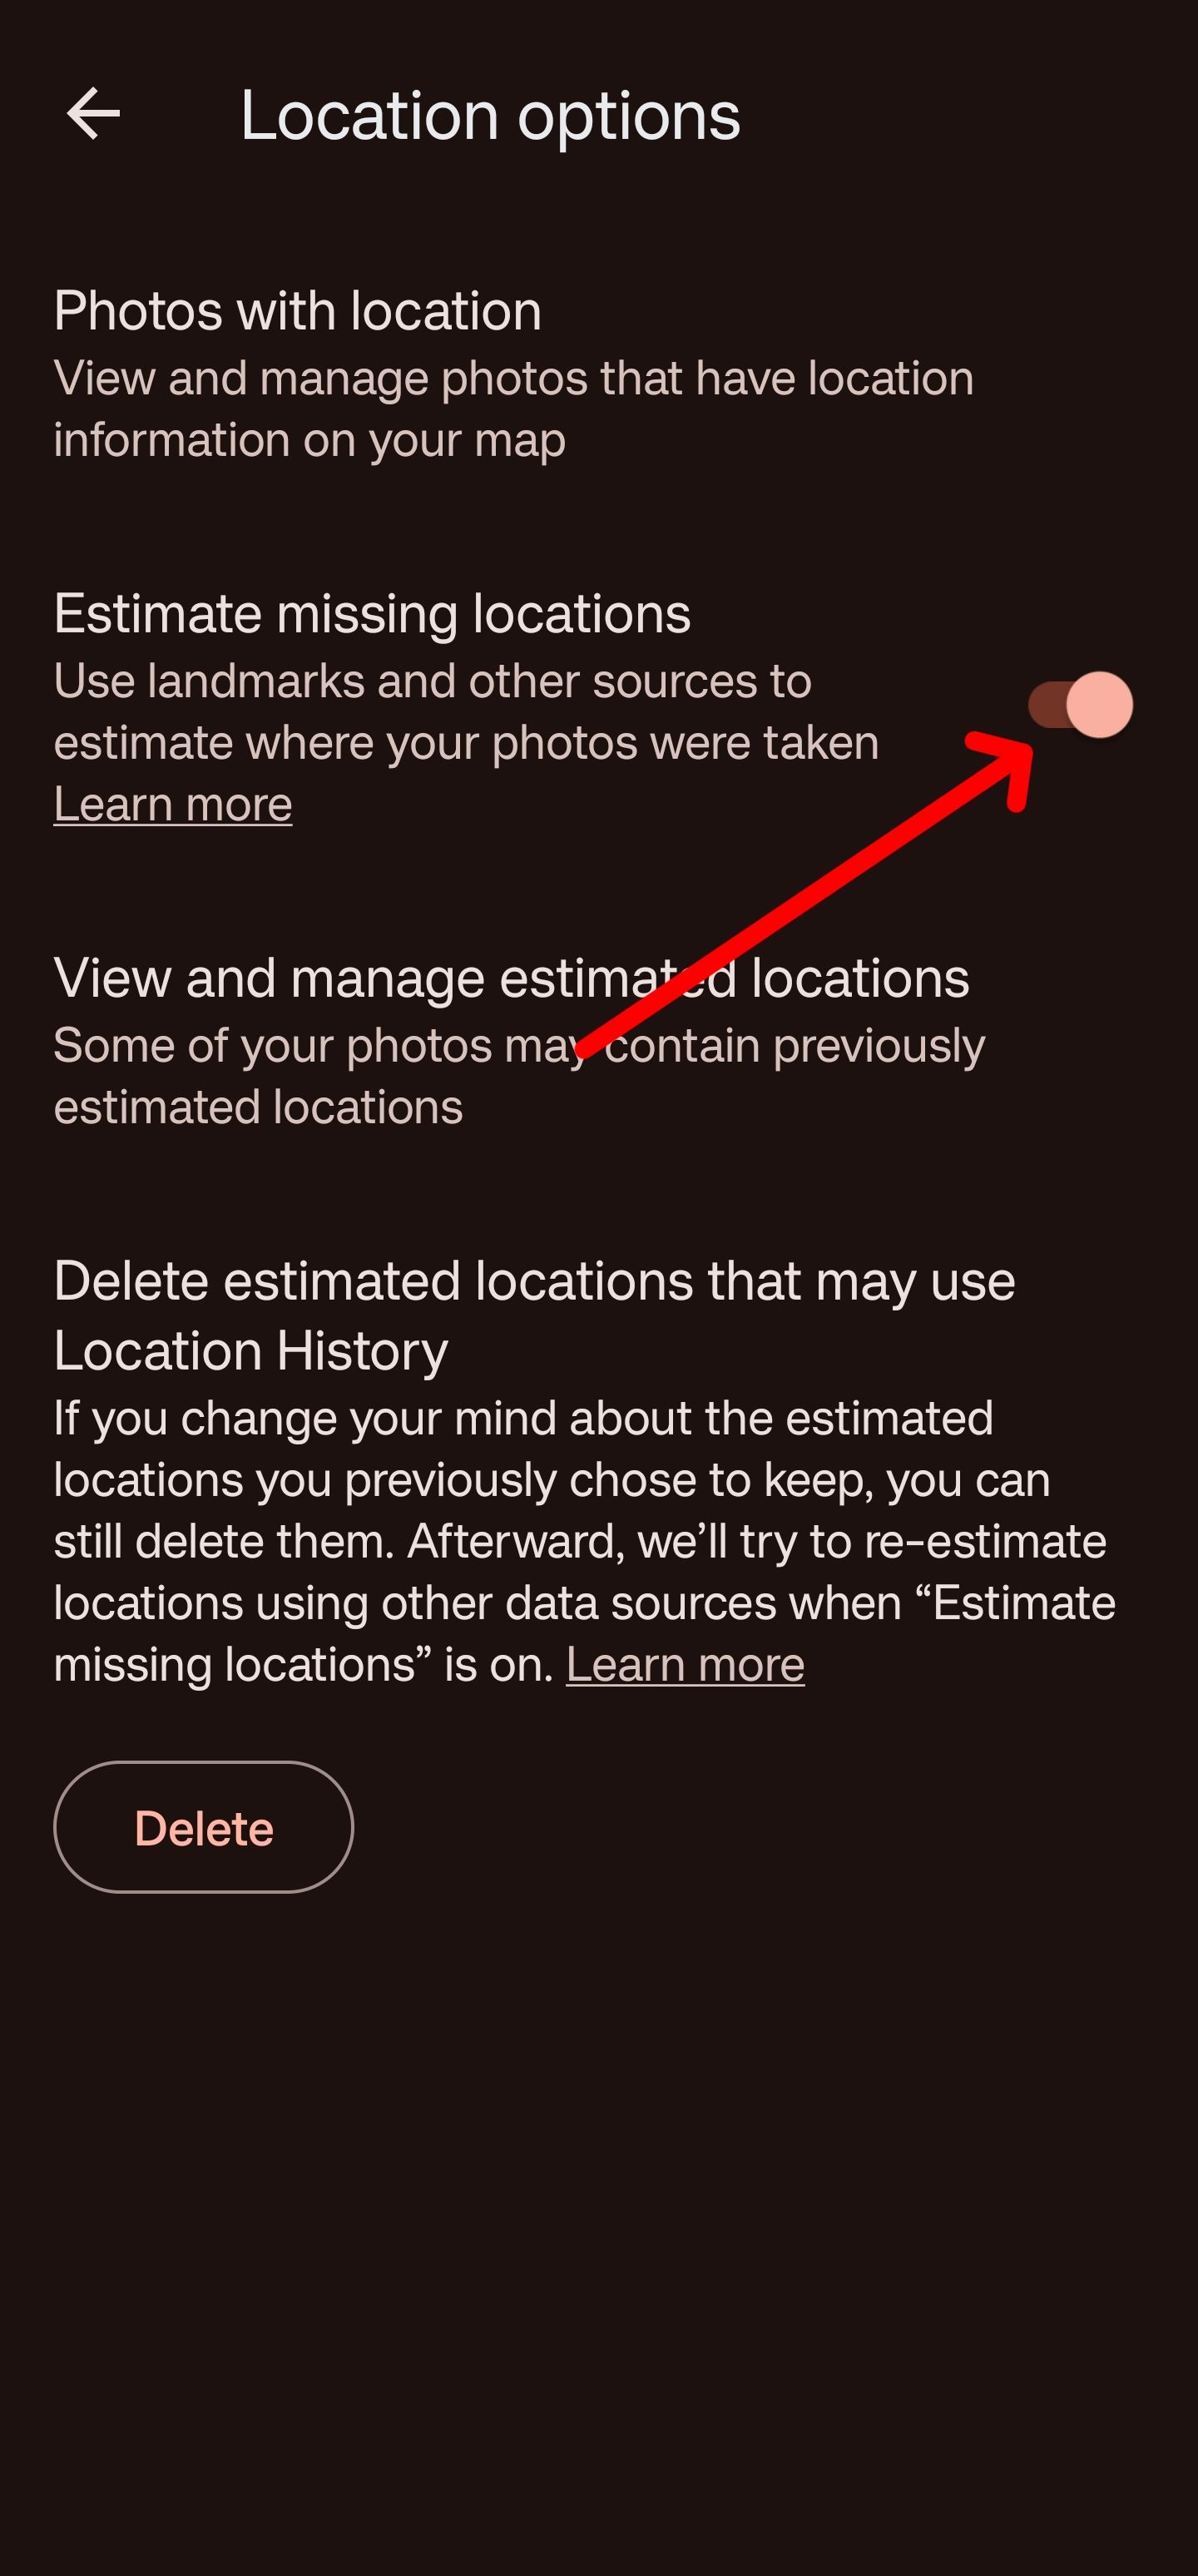 Next to estimate missing locations, click the switch to turn it off.